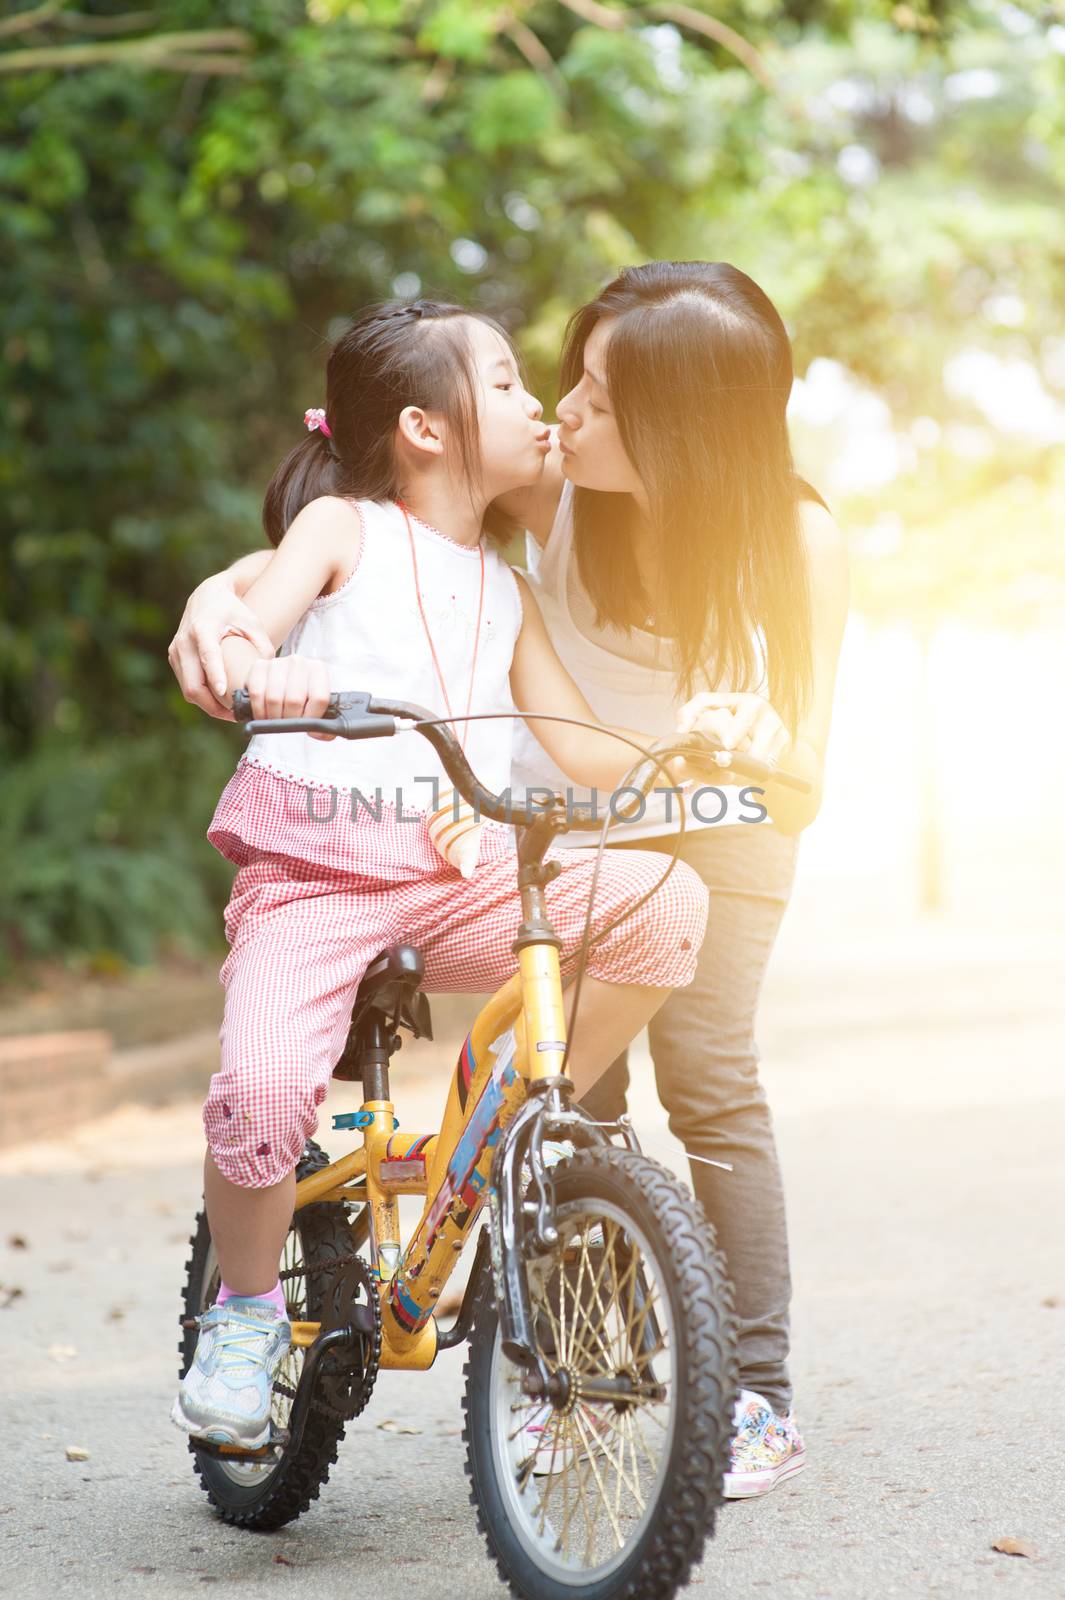 Child riding bike and giving kiss to mother, outdoor park. by szefei